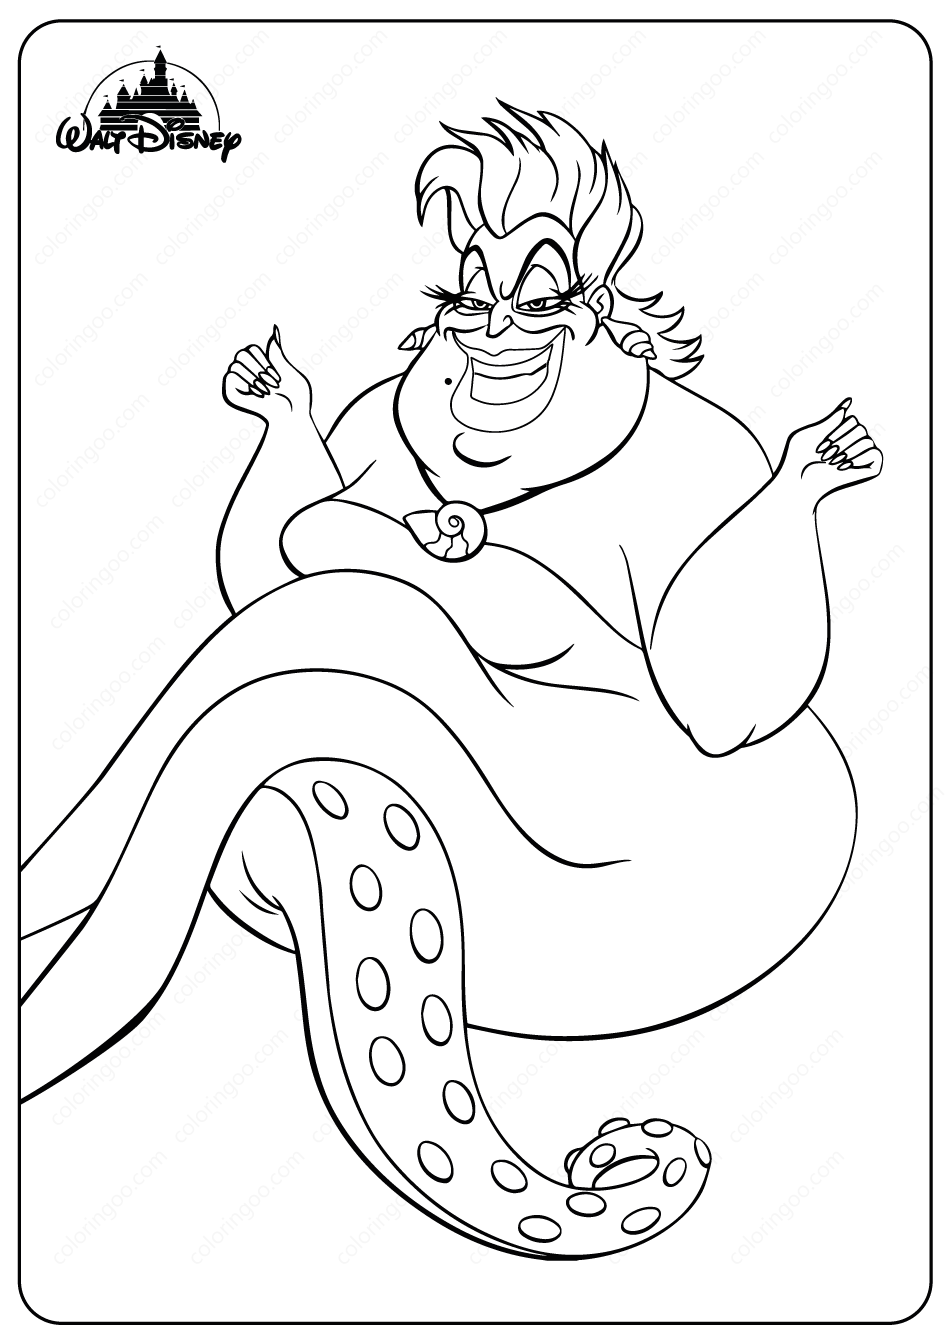 Disney sea witch ursula coloring pages mermaid coloring pages witch coloring pages disney coloring pages